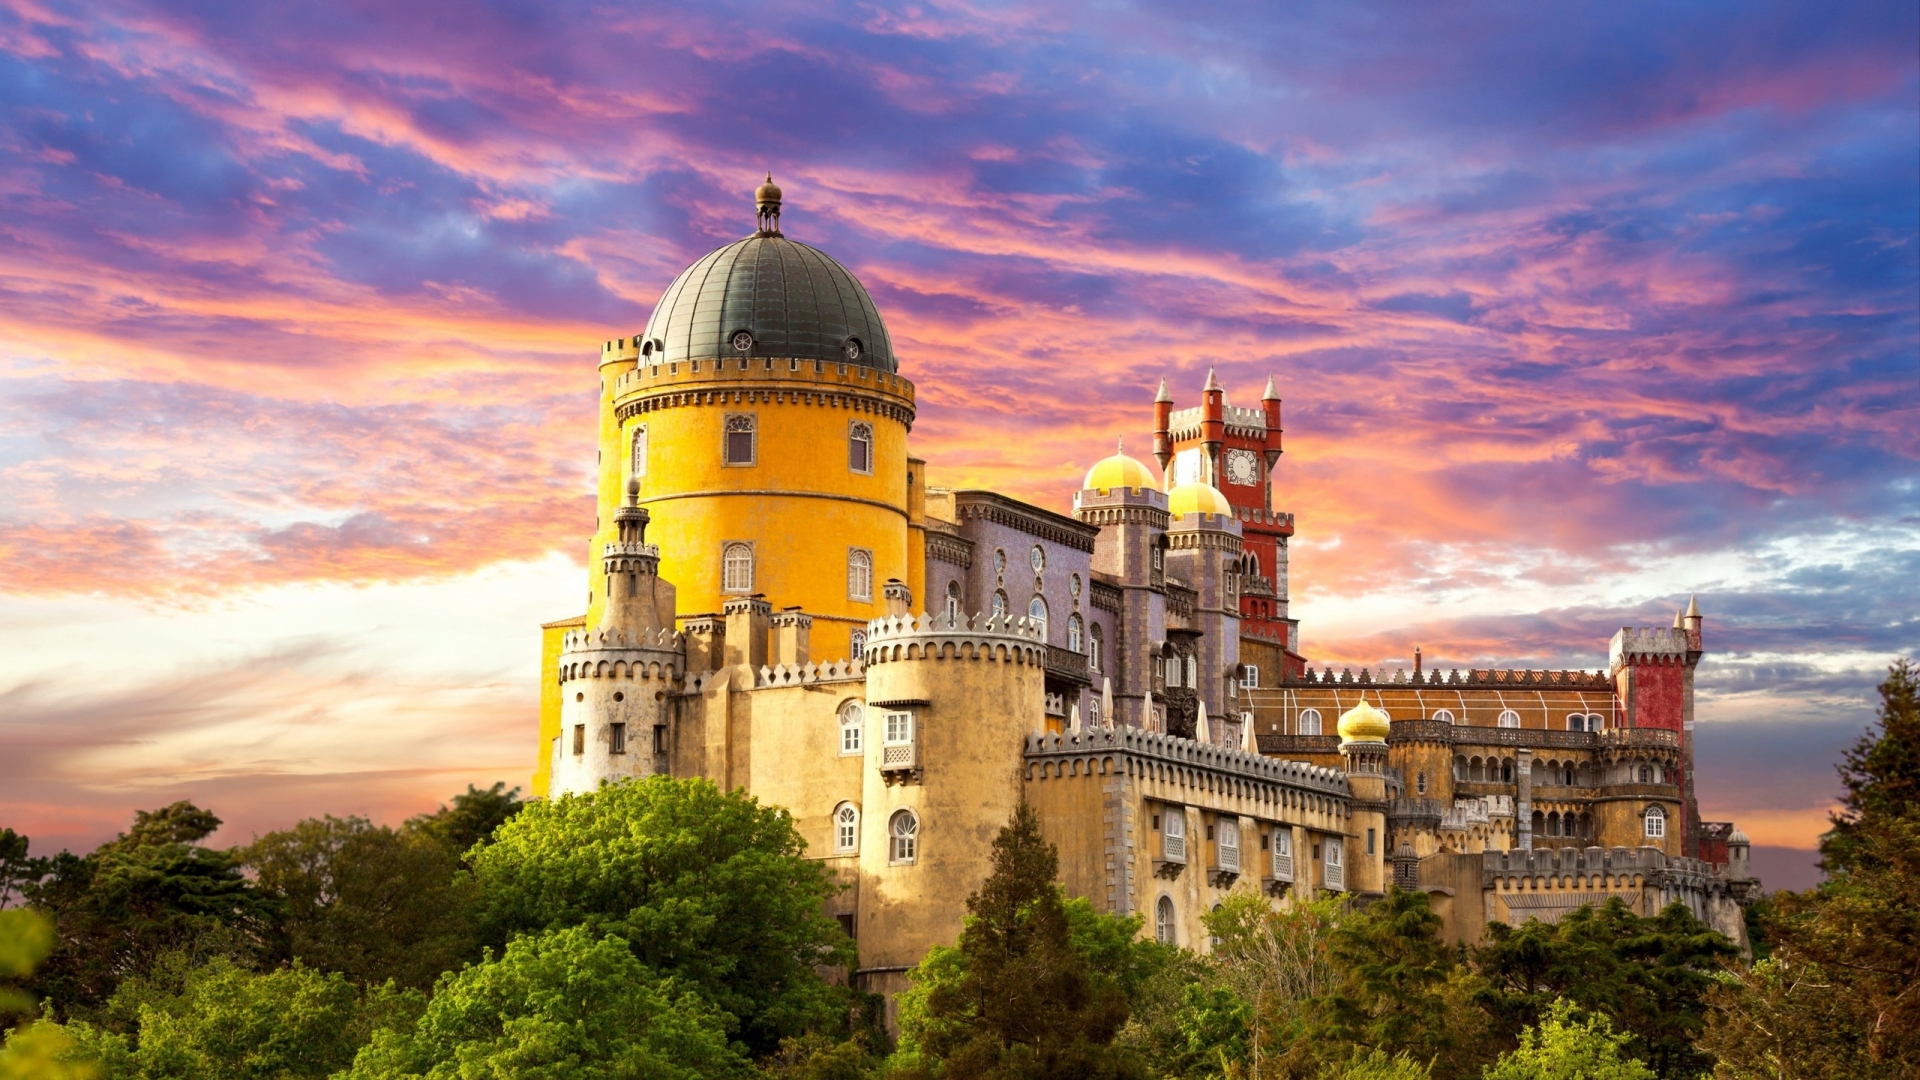 Pena National Palace Portugal for 1920 x 1080 HDTV 1080p resolution